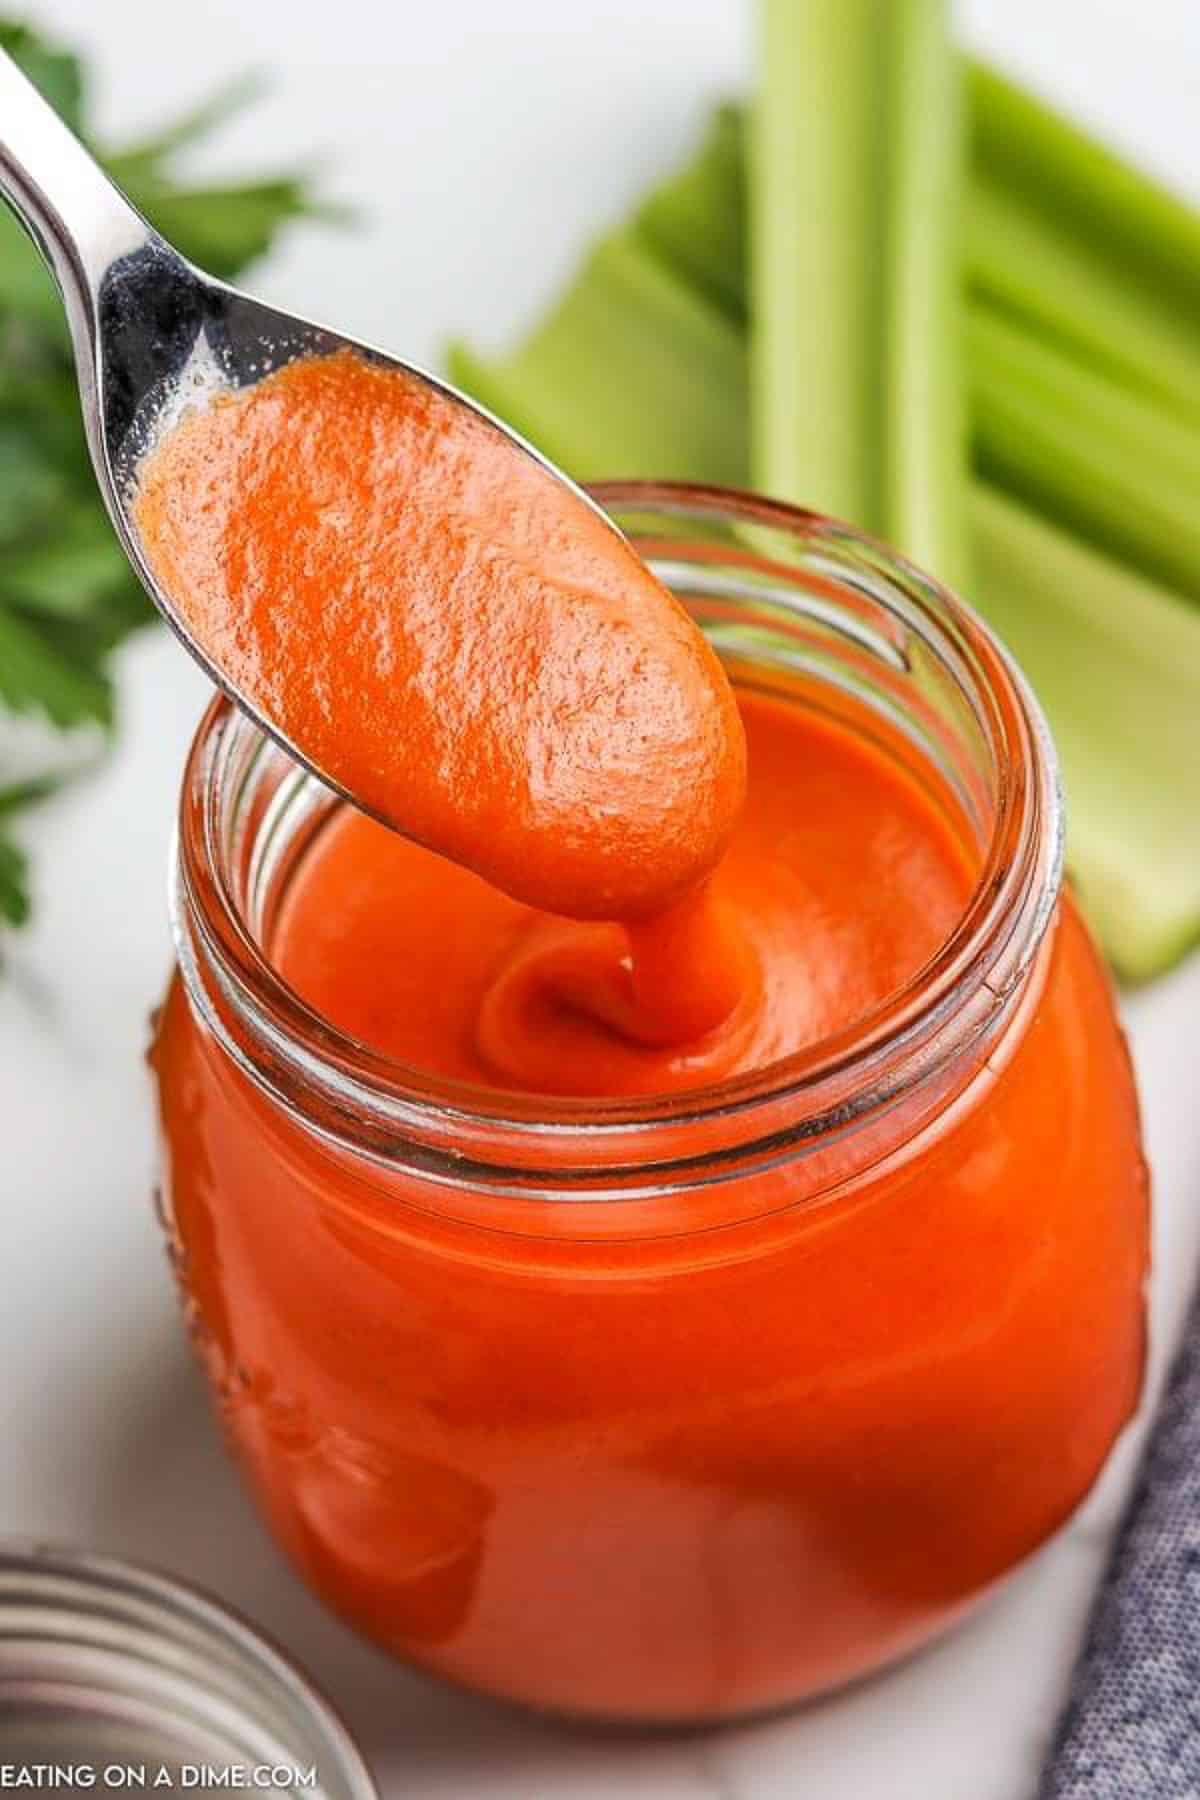 A spoon scooping out a serving of buffalo sauce from a jar of homemade buffalo sauce with celery sticks behind it.  